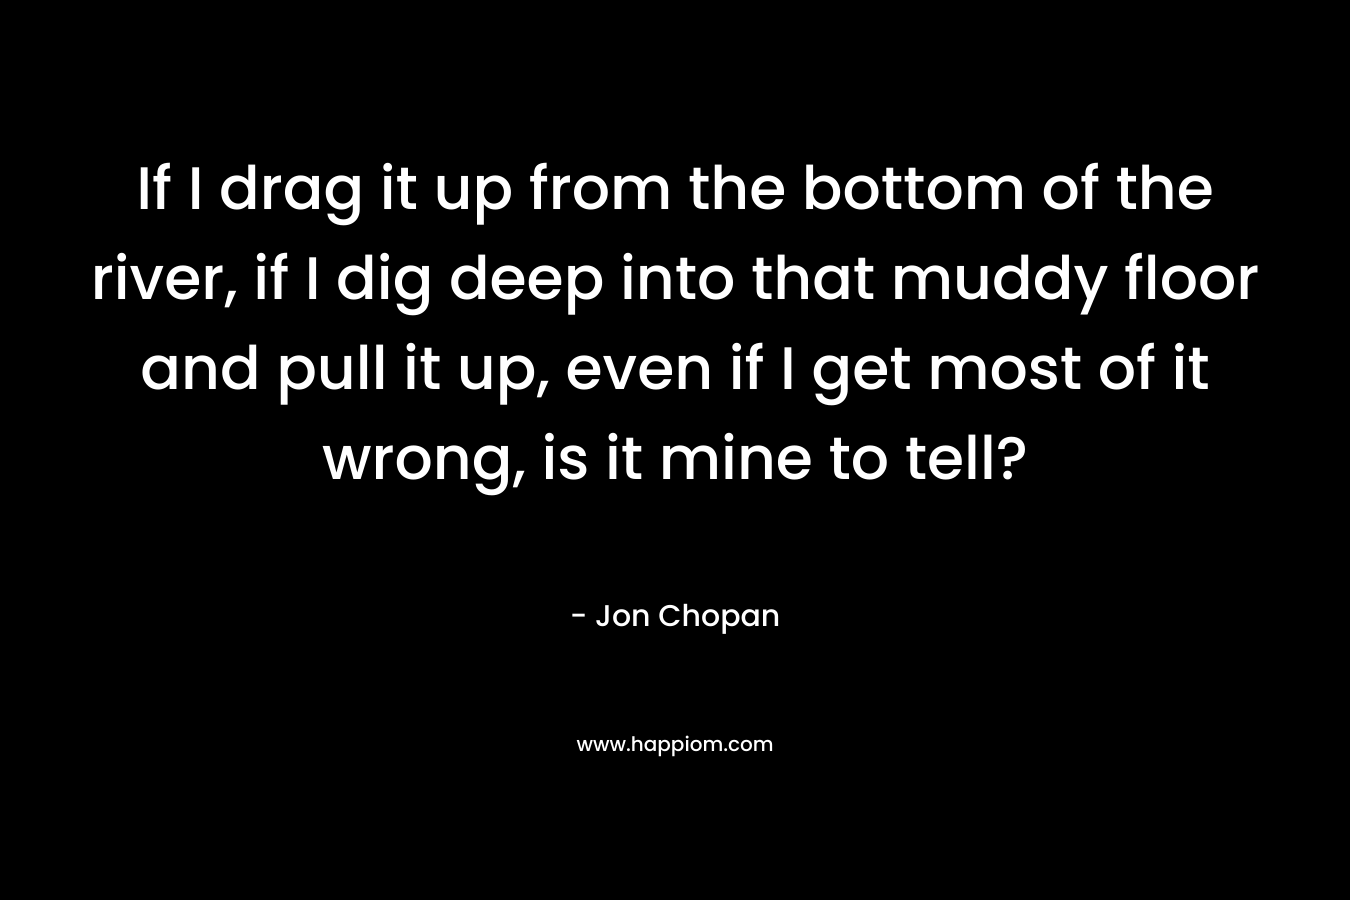 If I drag it up from the bottom of the river, if I dig deep into that muddy floor and pull it up, even if I get most of it wrong, is it mine to tell? – Jon Chopan